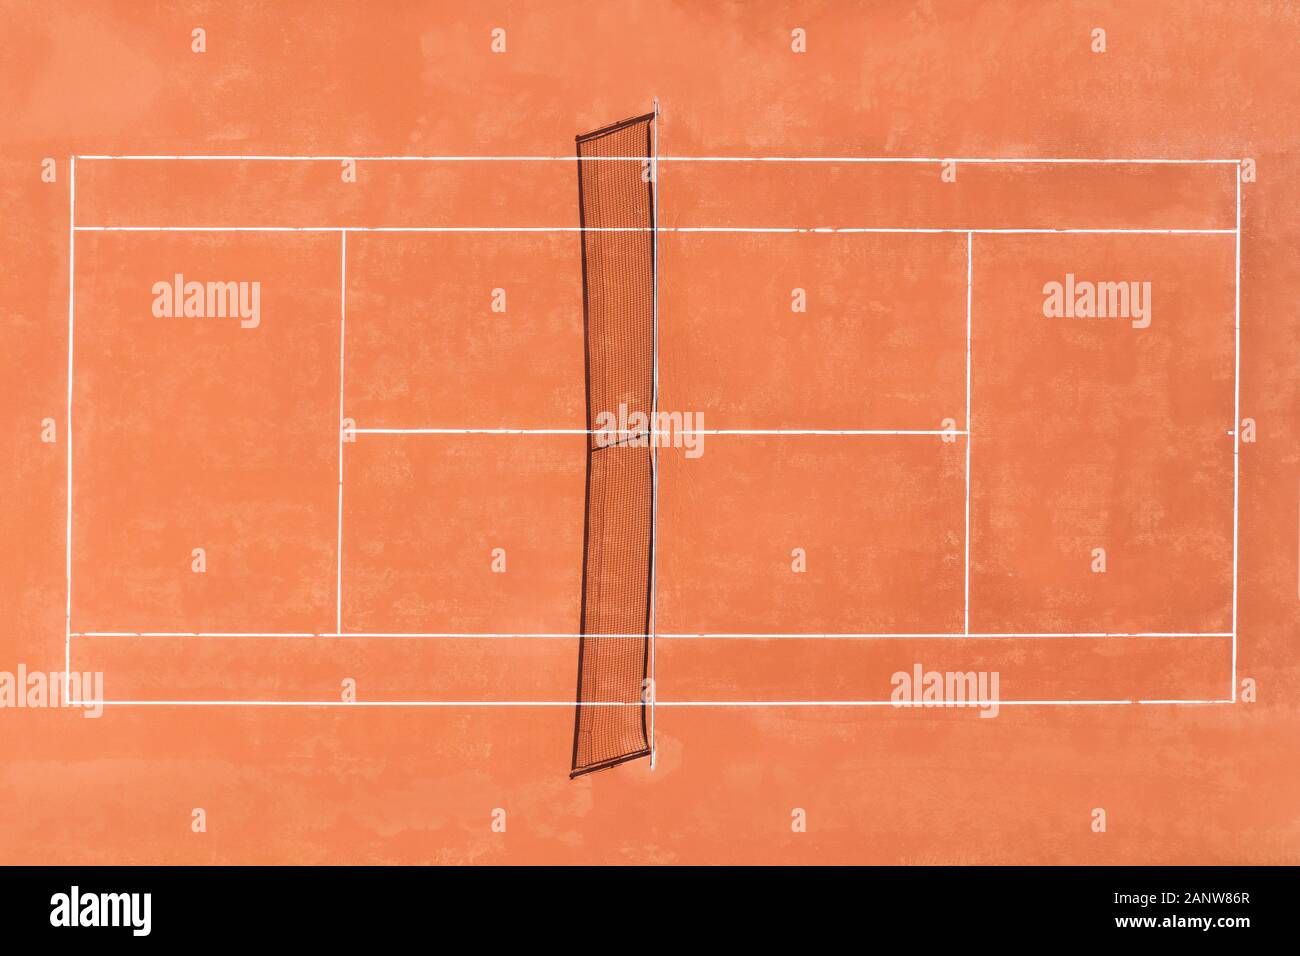 Aerial view of a prfessional red clay court, ready to play Tennis Stock Photo